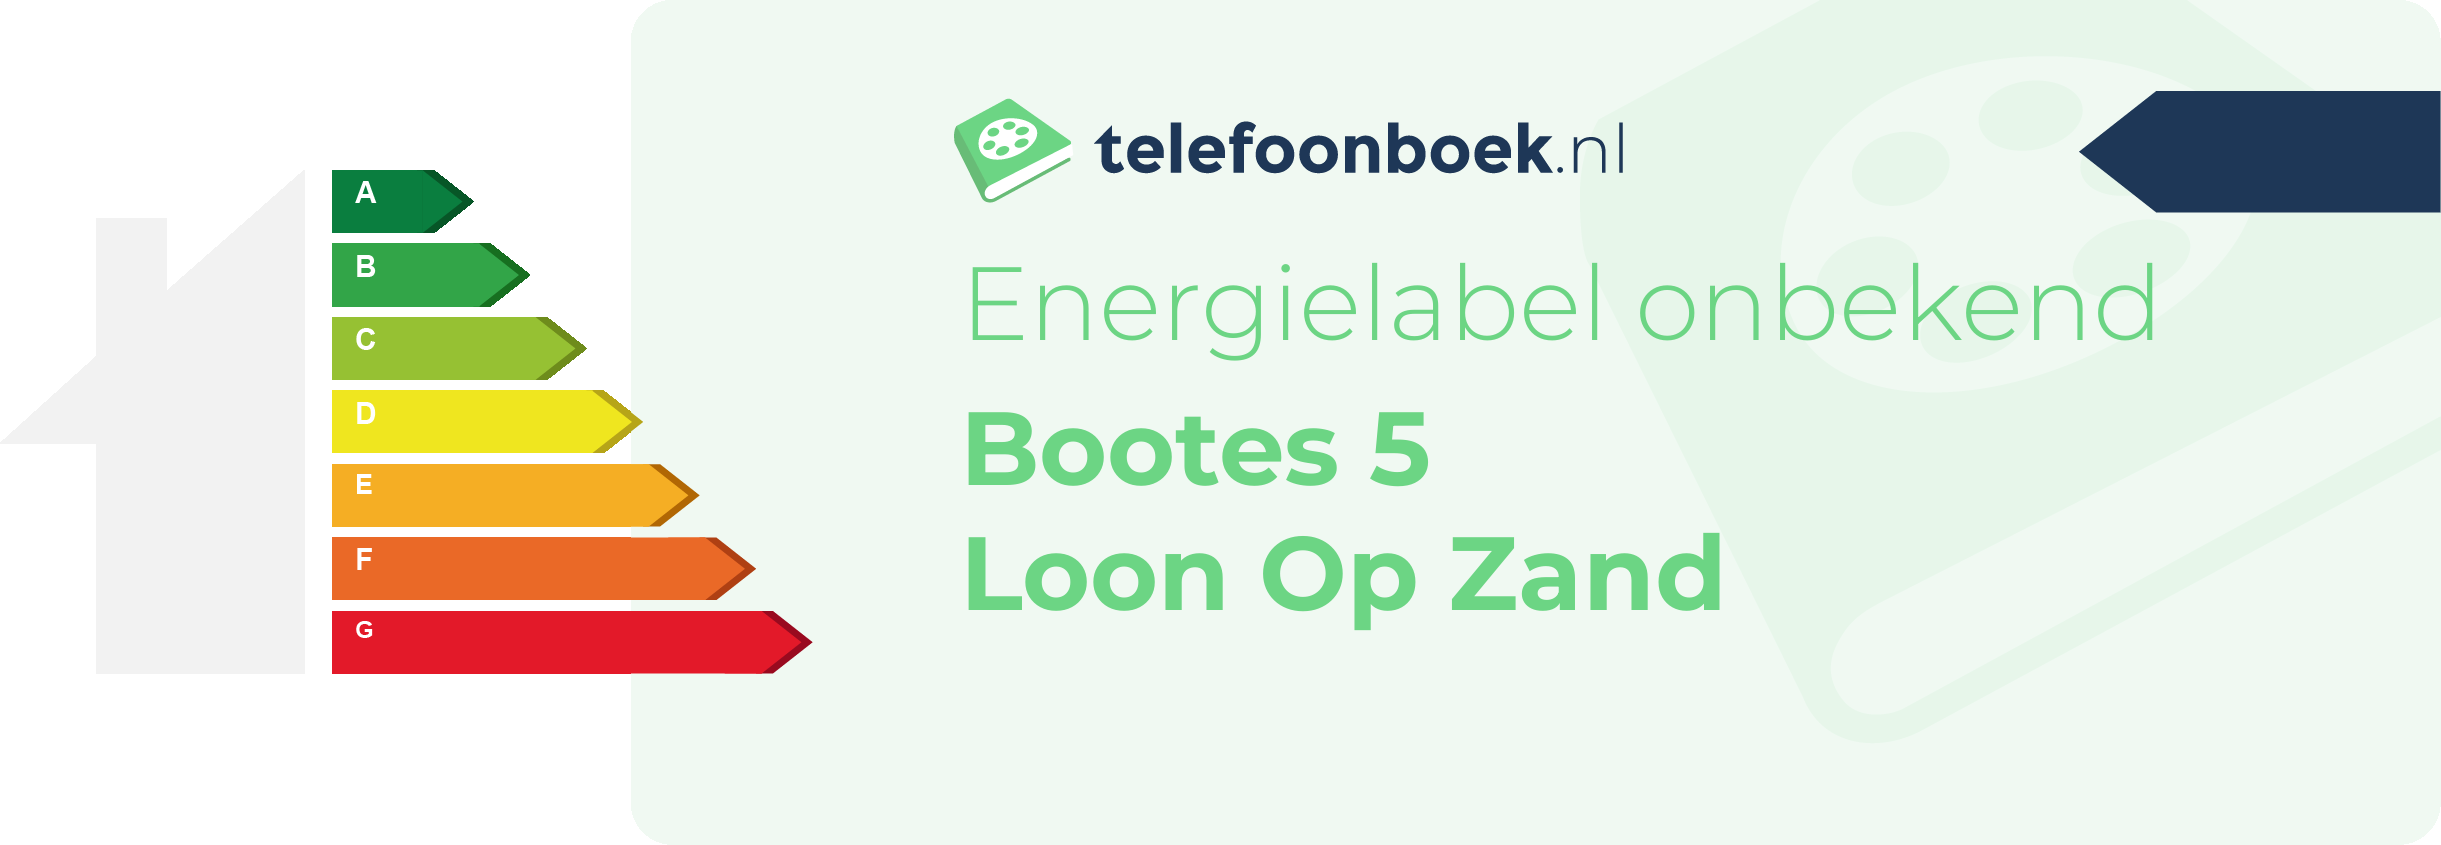 Energielabel Bootes 5 Loon Op Zand